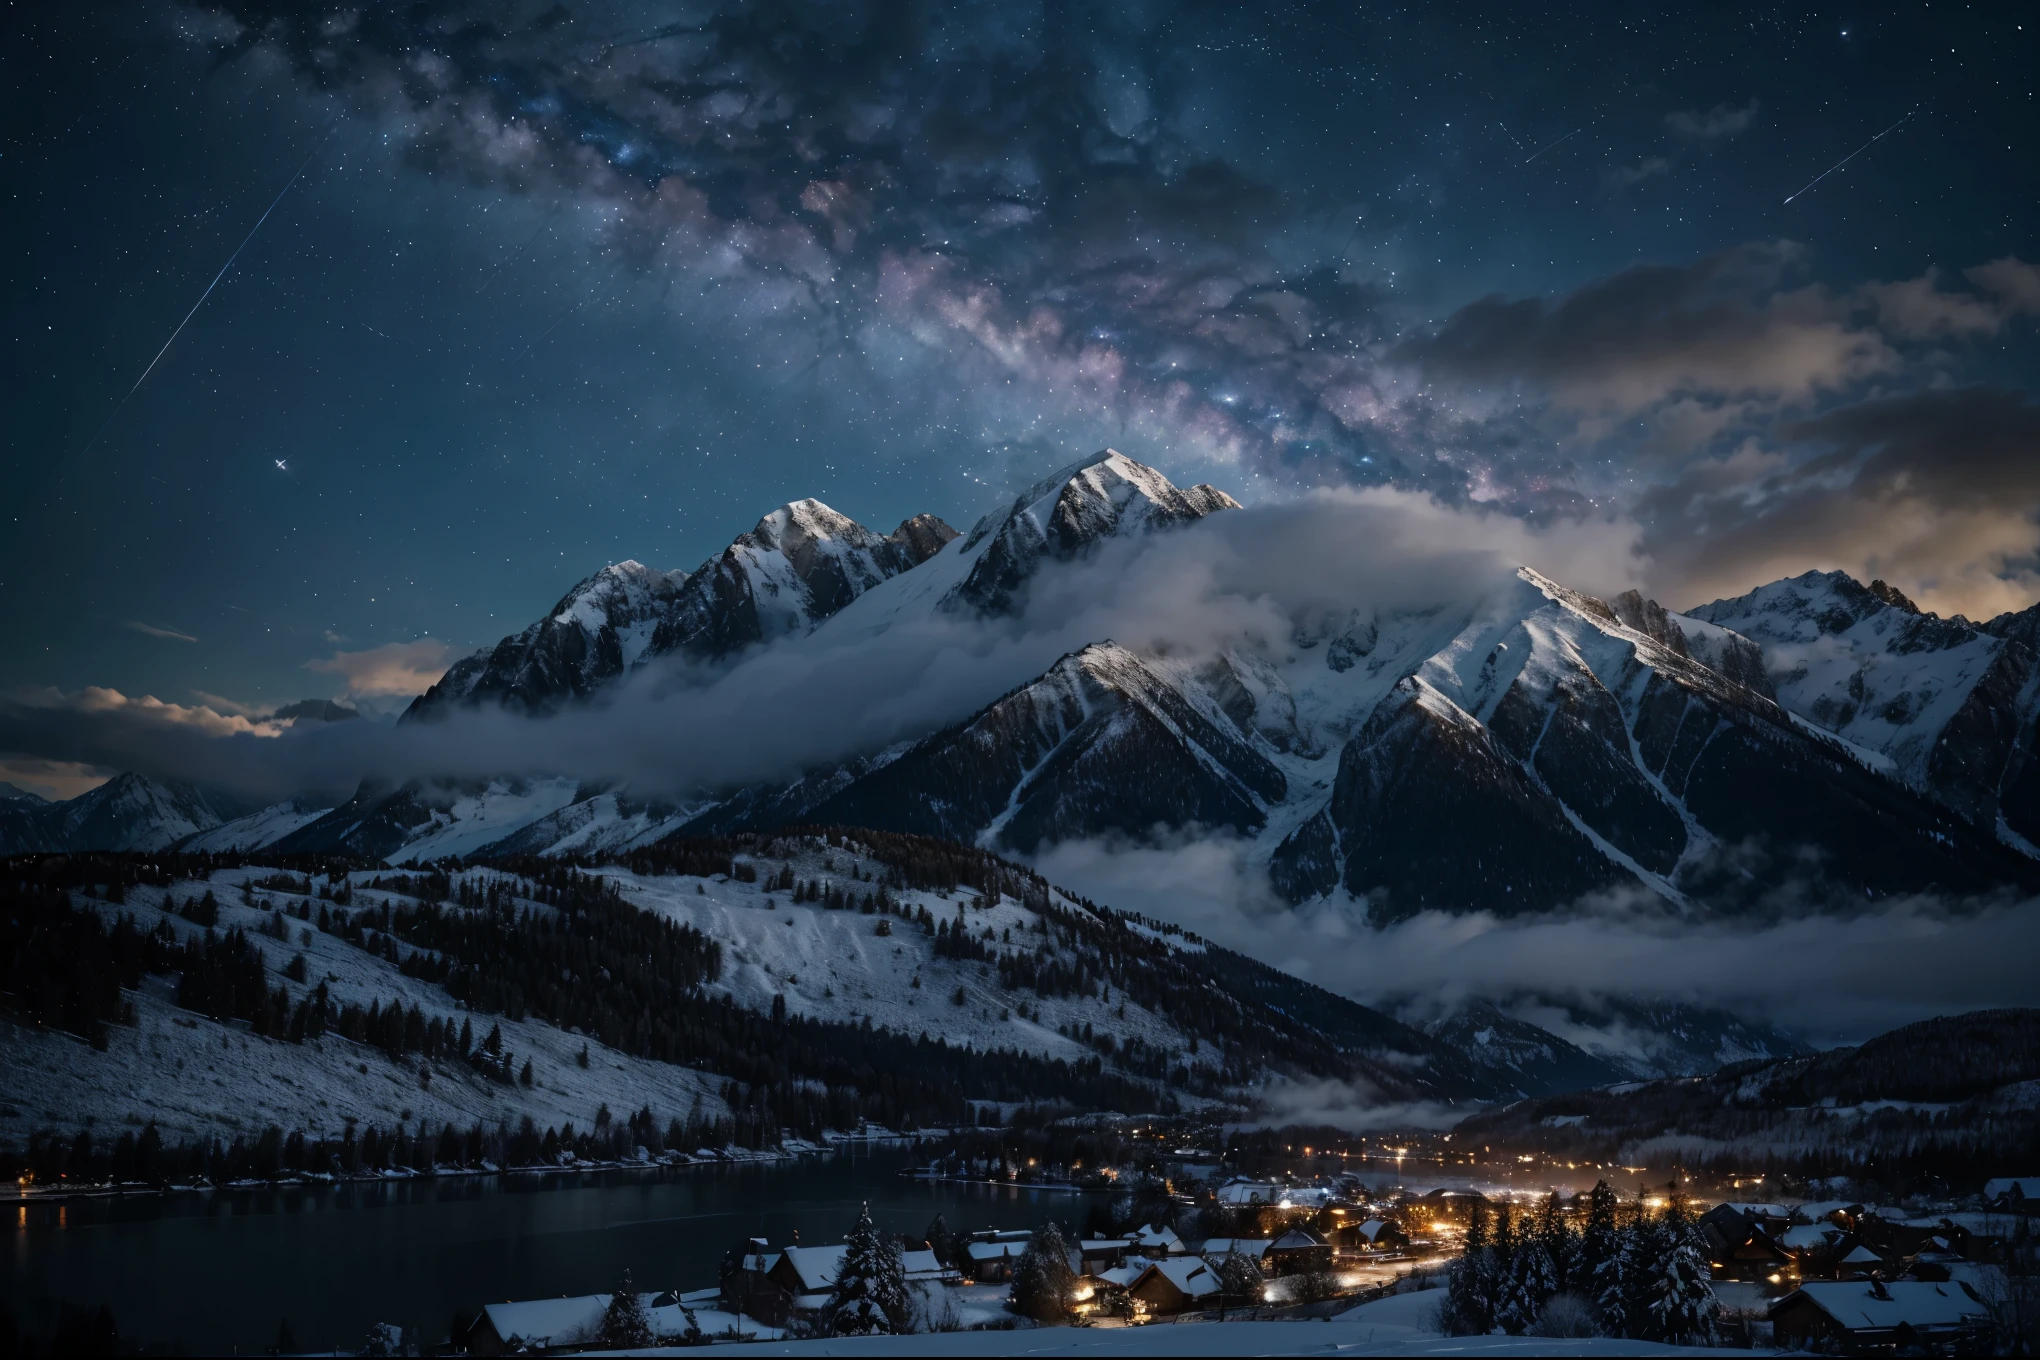 Background, lots of high mountains, lots of clouds, winter sky, seeing constellations, Galaxy, Milky Way, beautiful winter night with small city wallpaper, beautiful lake, high details, realistic 8k full HD.
